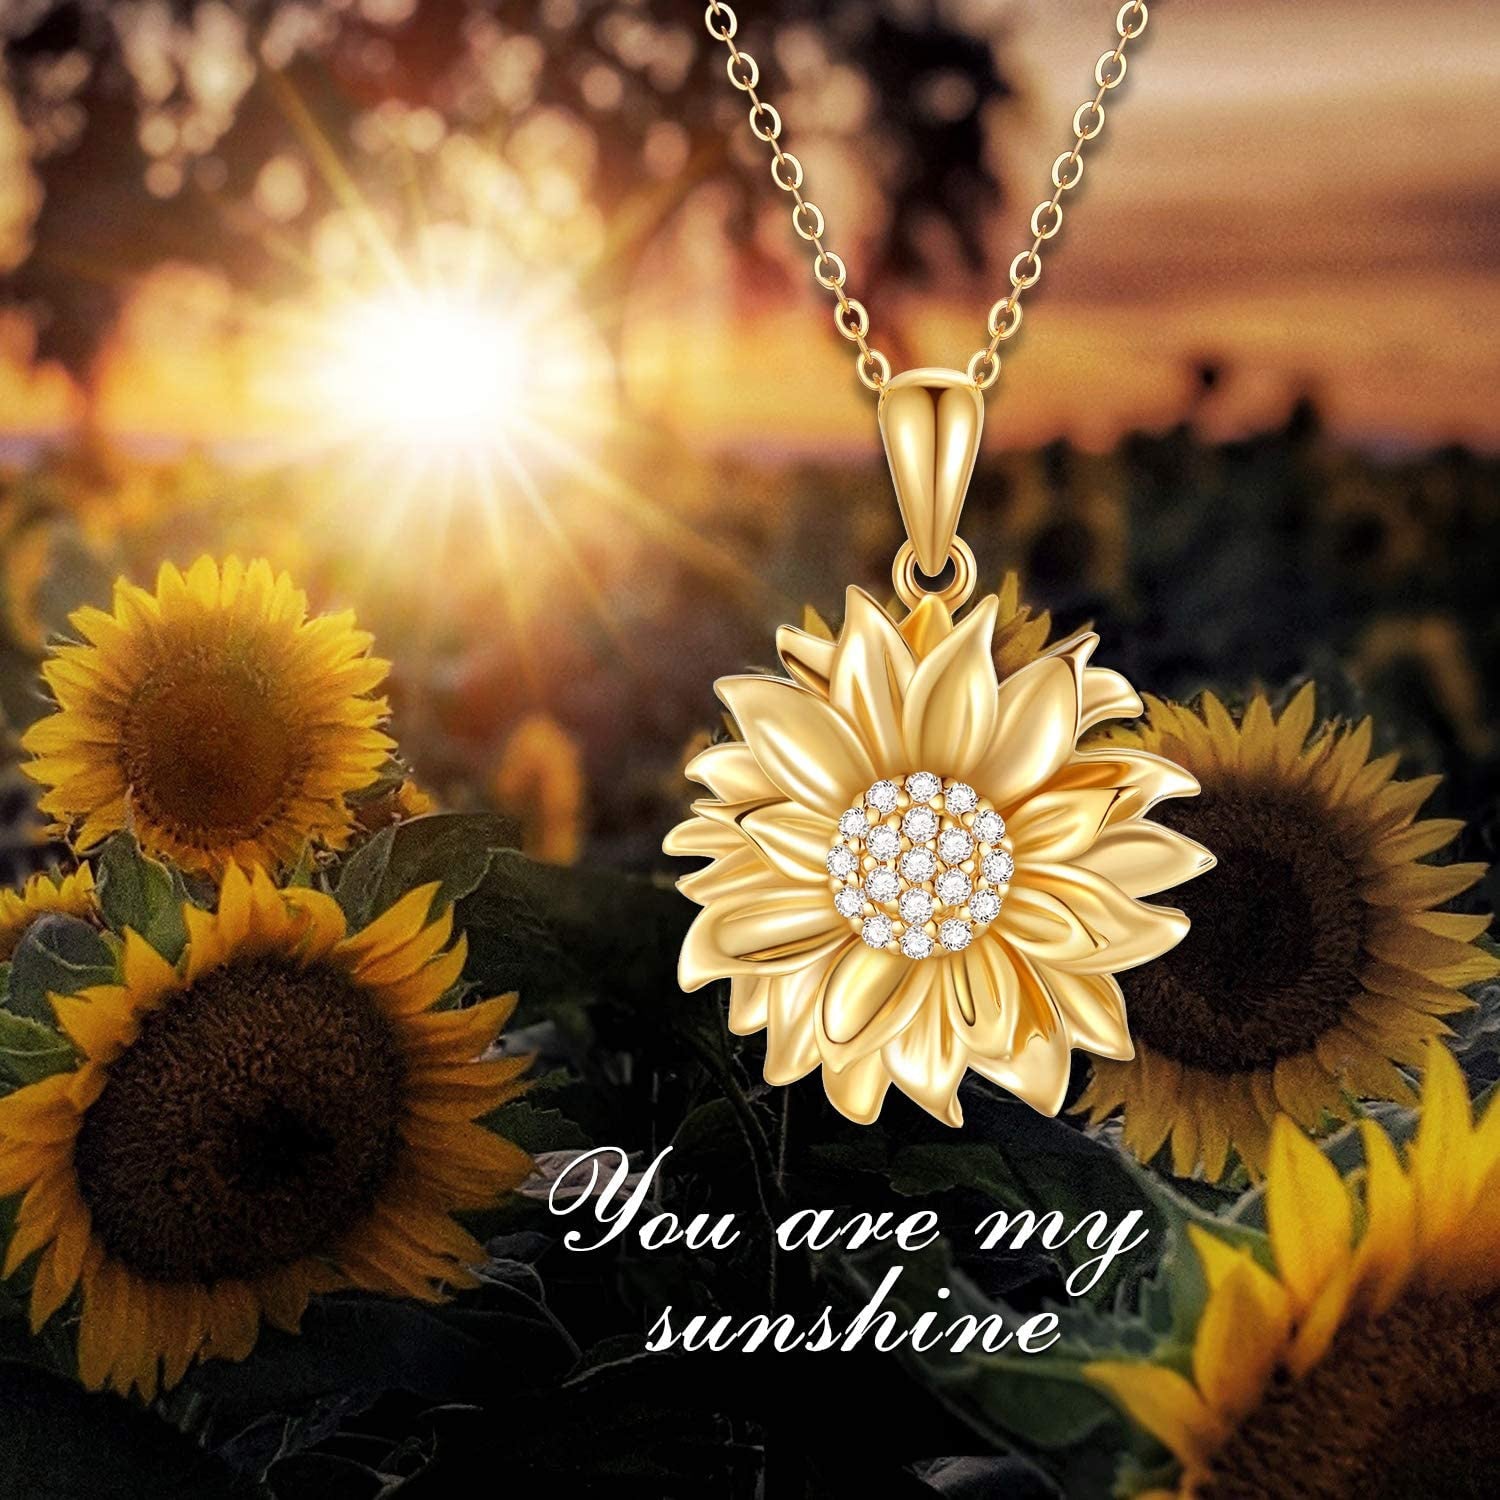 Rose Valley Sunflower Pendant Necklace for Women CZ Pendants Fashion Jewelry Girls Gifts YN044 - Charlie Dolly